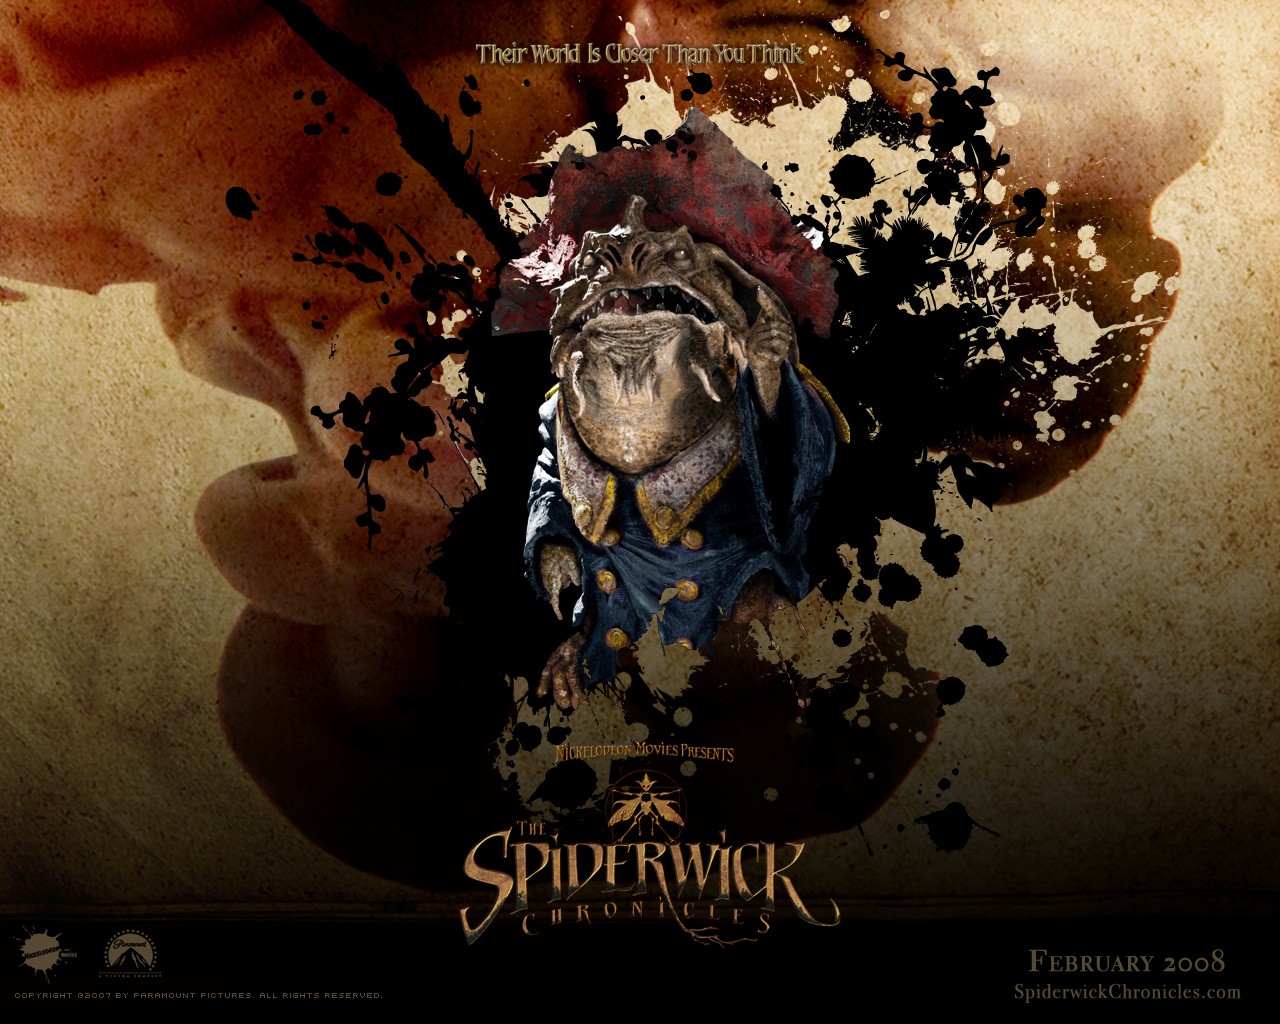 Download full size The Spiderwick Chronicles wallpaper / Movies / 1280x1024